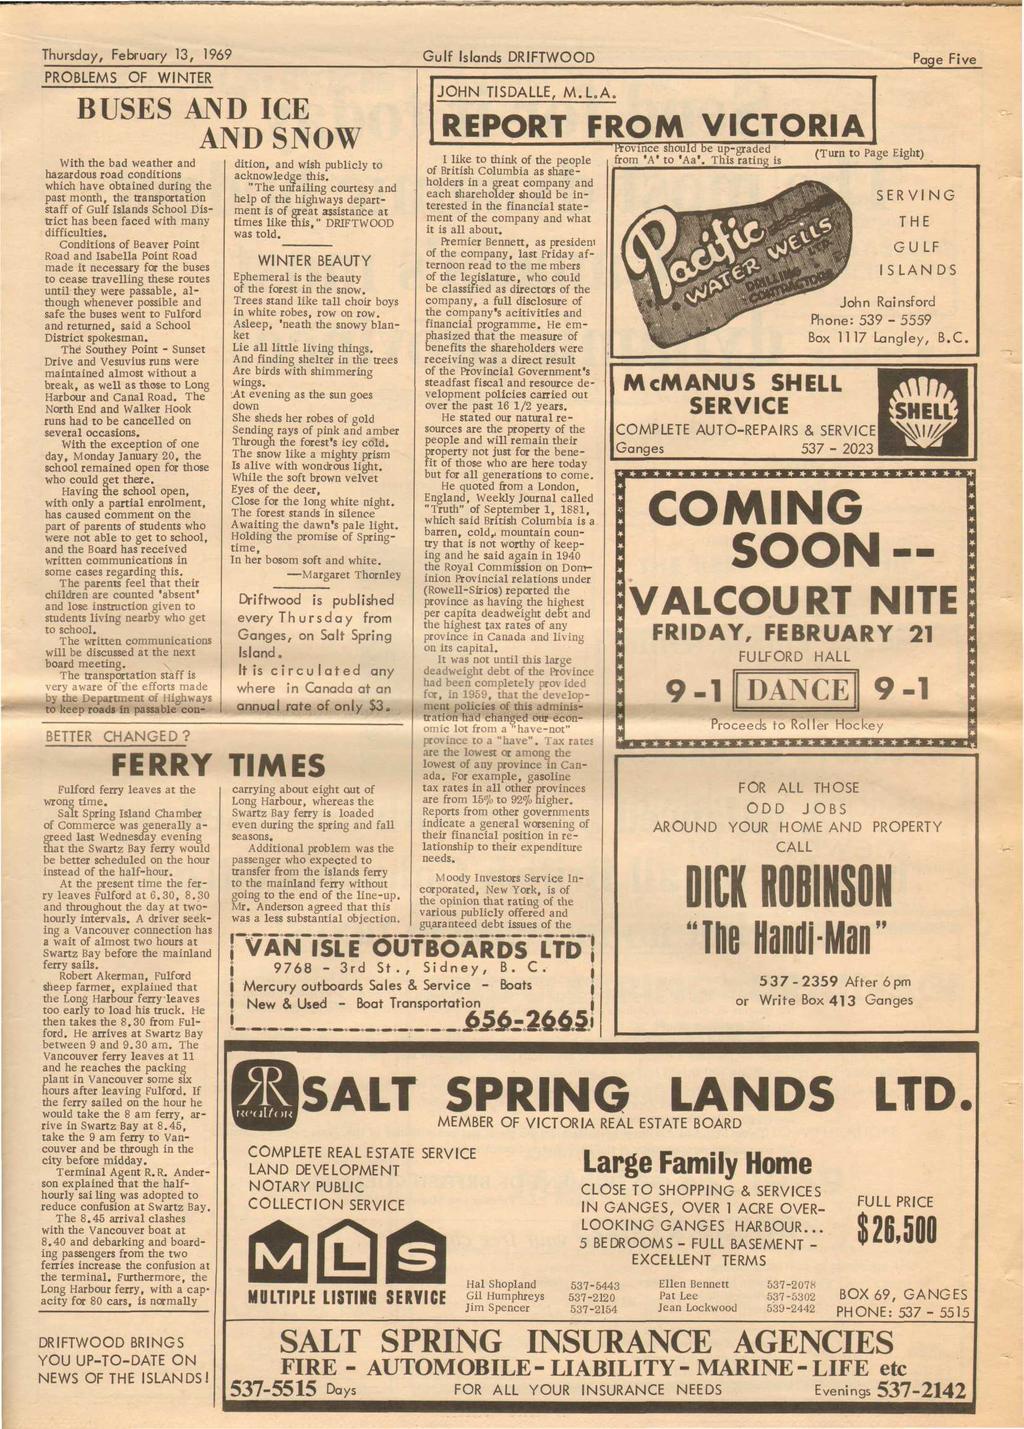 Thursday, February 13, 1969 Gulf Islands DRIFTWOOD Page Five PROBLEMS OF WINTER BUSES AND ICE BETTER CHANGED?